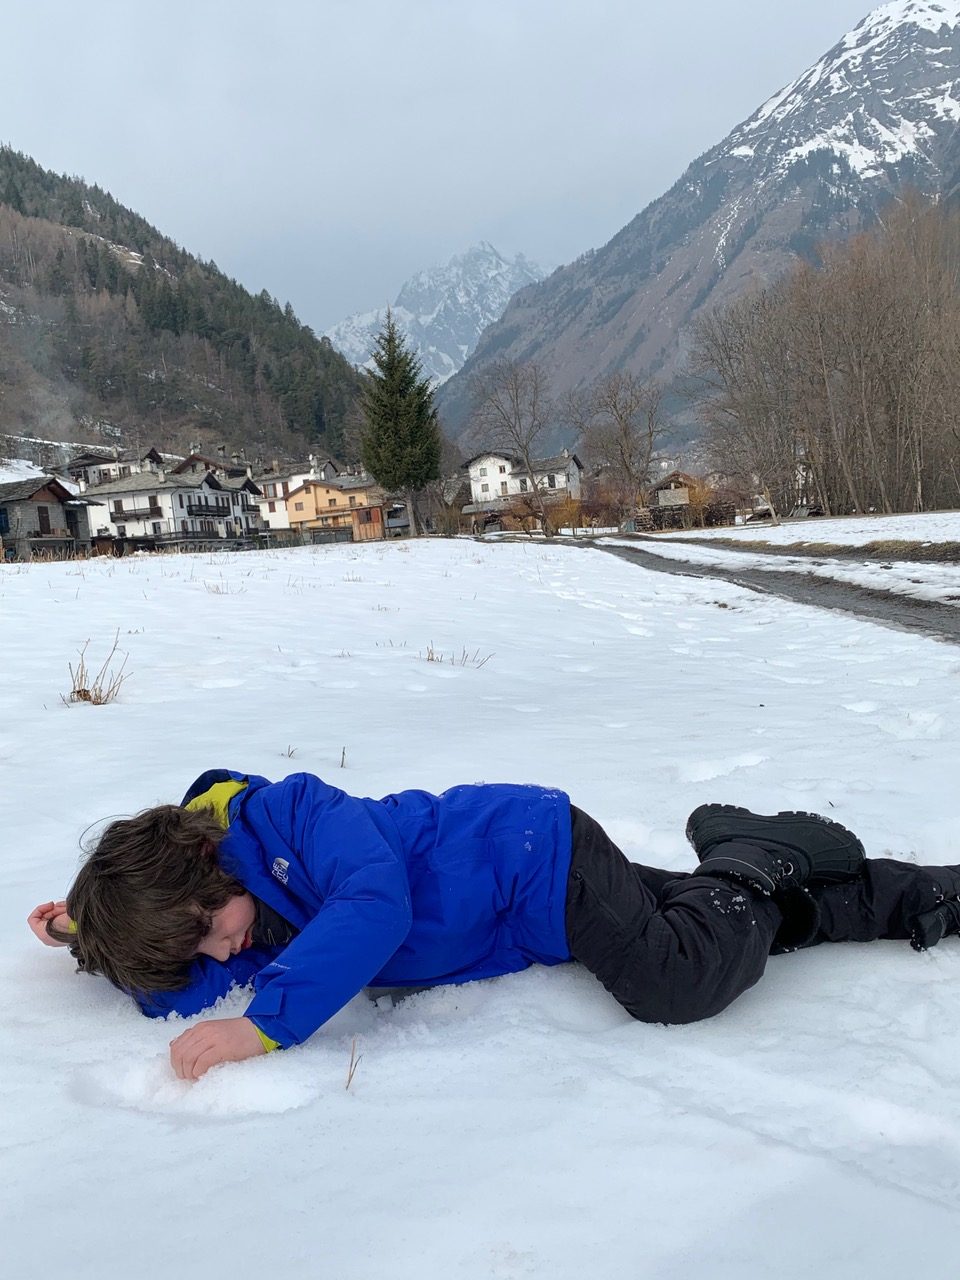 My youngest was playing no ball to keep on moving... Our half term ski-safari holiday based in the Valdigne of Aosta Valley- Courmayeur, Pila and La Thuile.